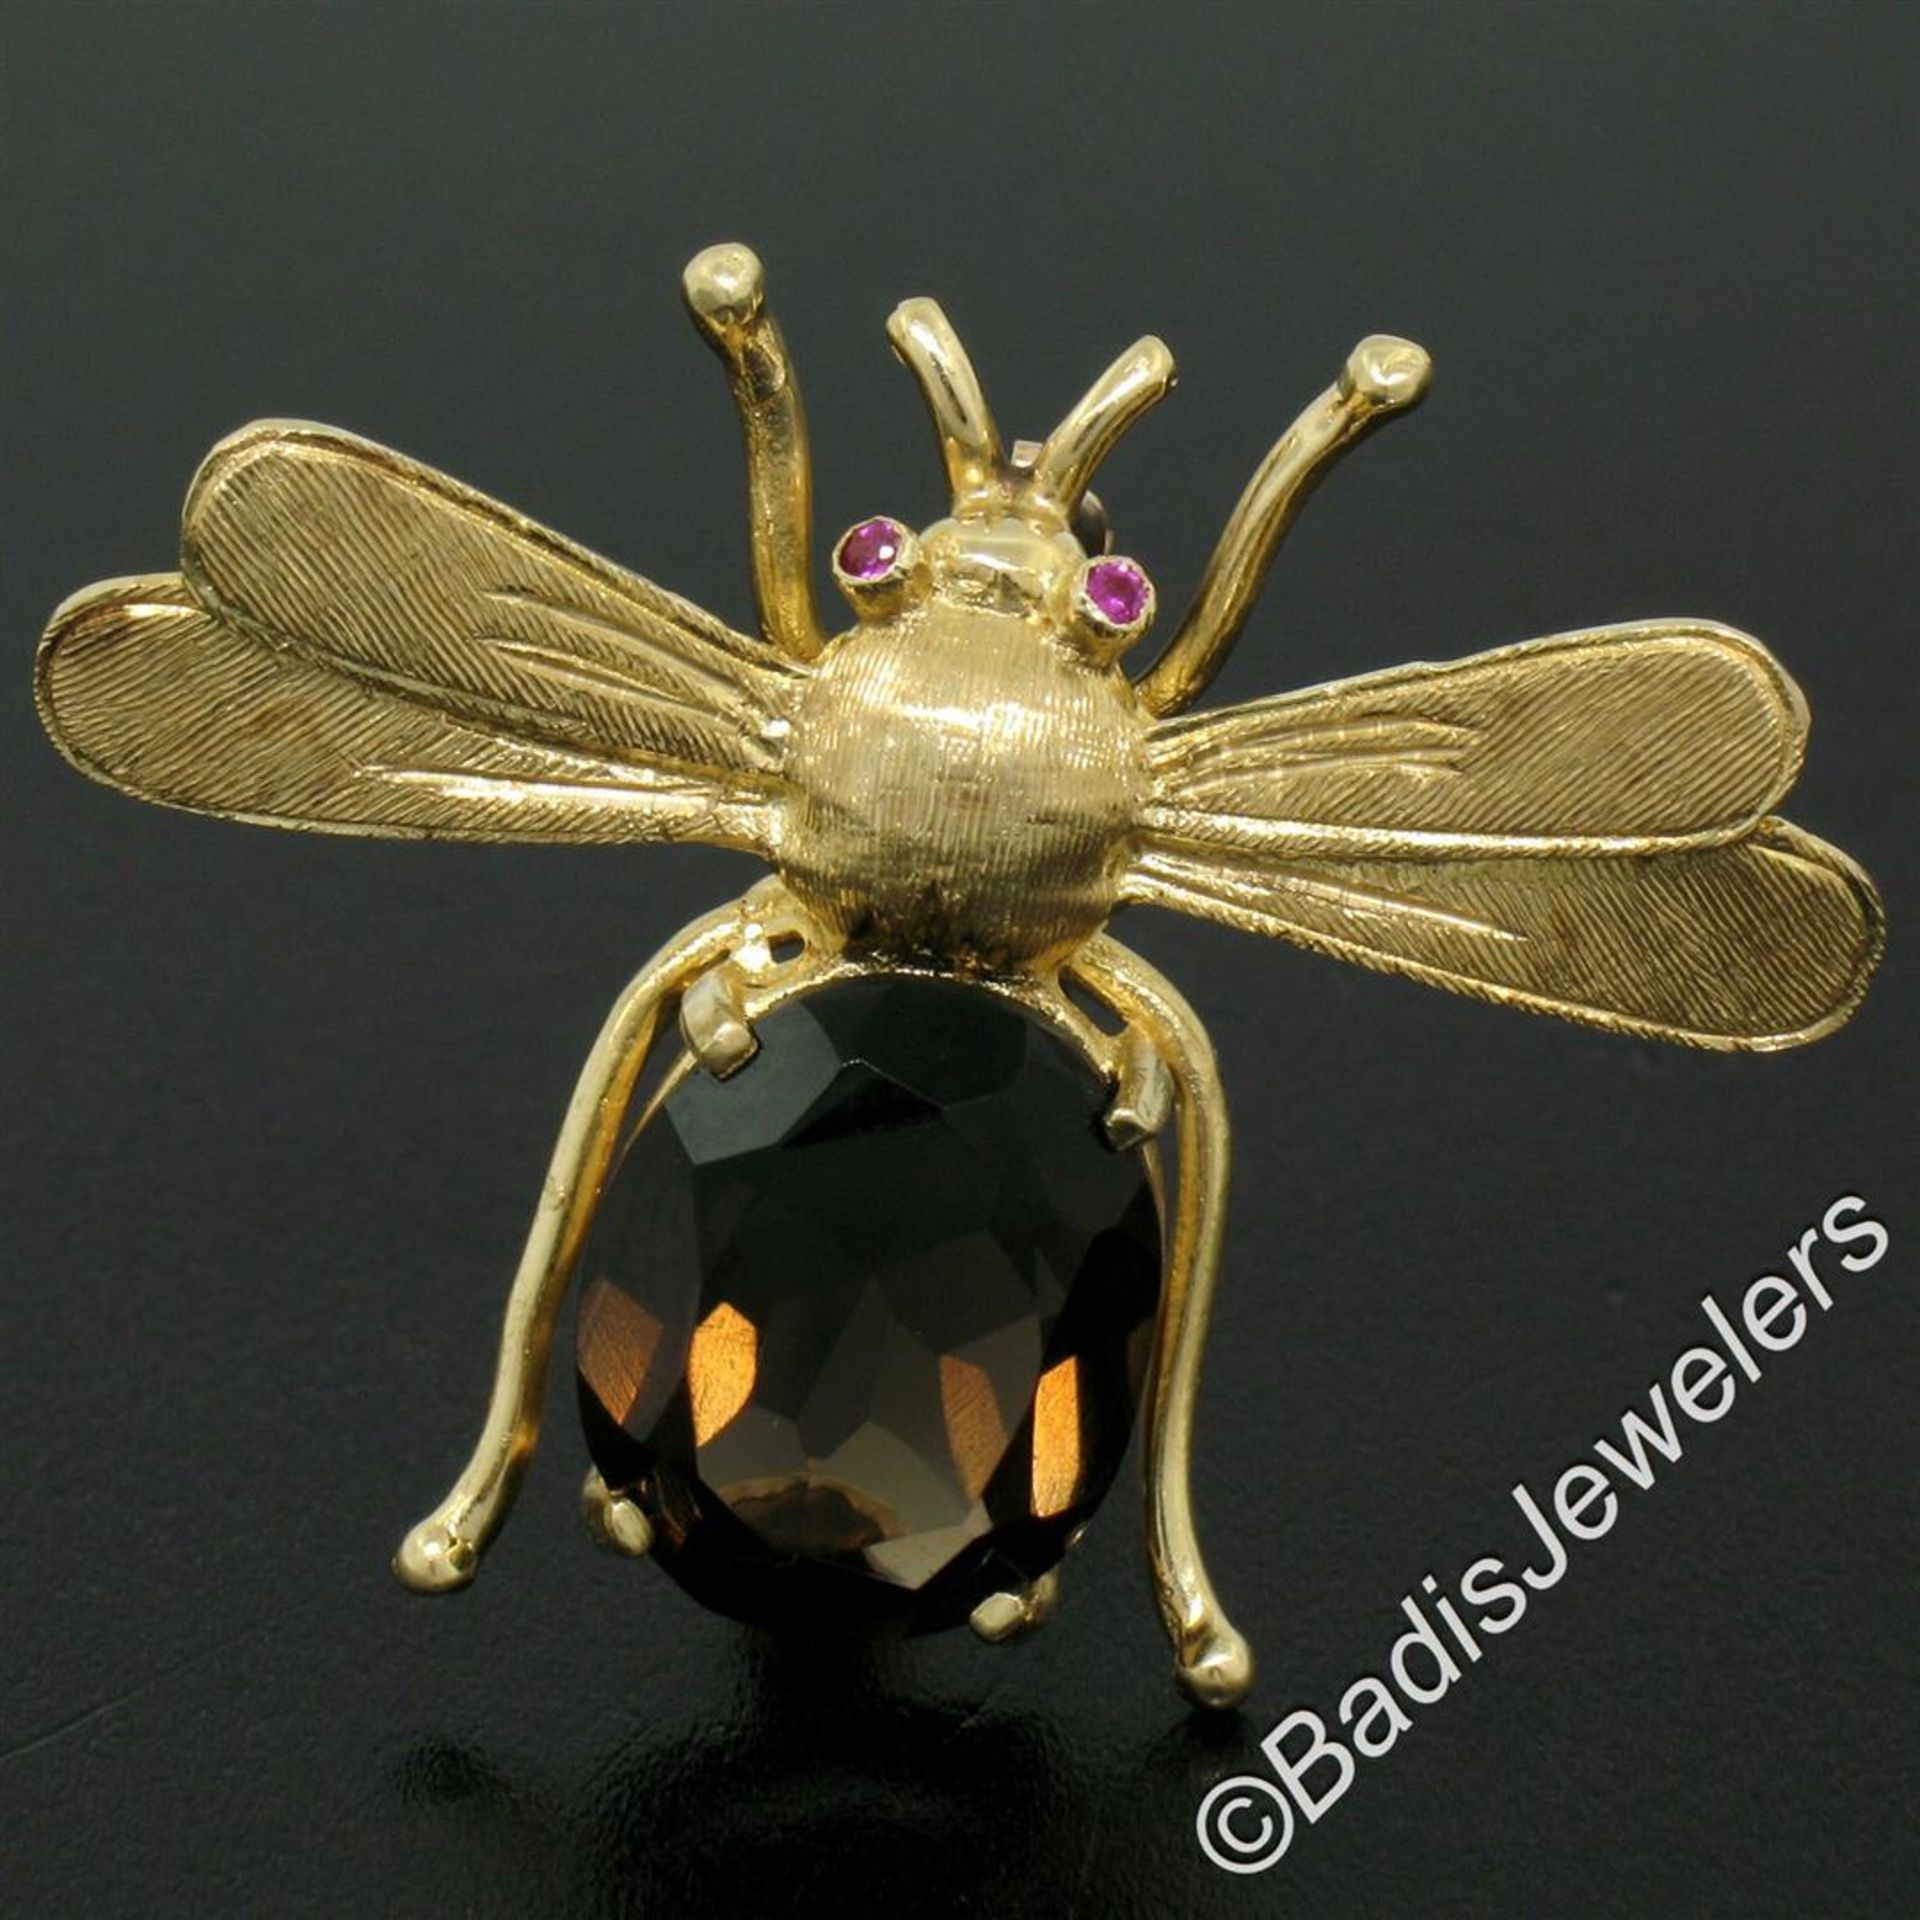 Vintage 14kt Yellow Gold 6.04 ctw Smokey Topaz and Ruby Fly Brooch Pin - Image 3 of 7